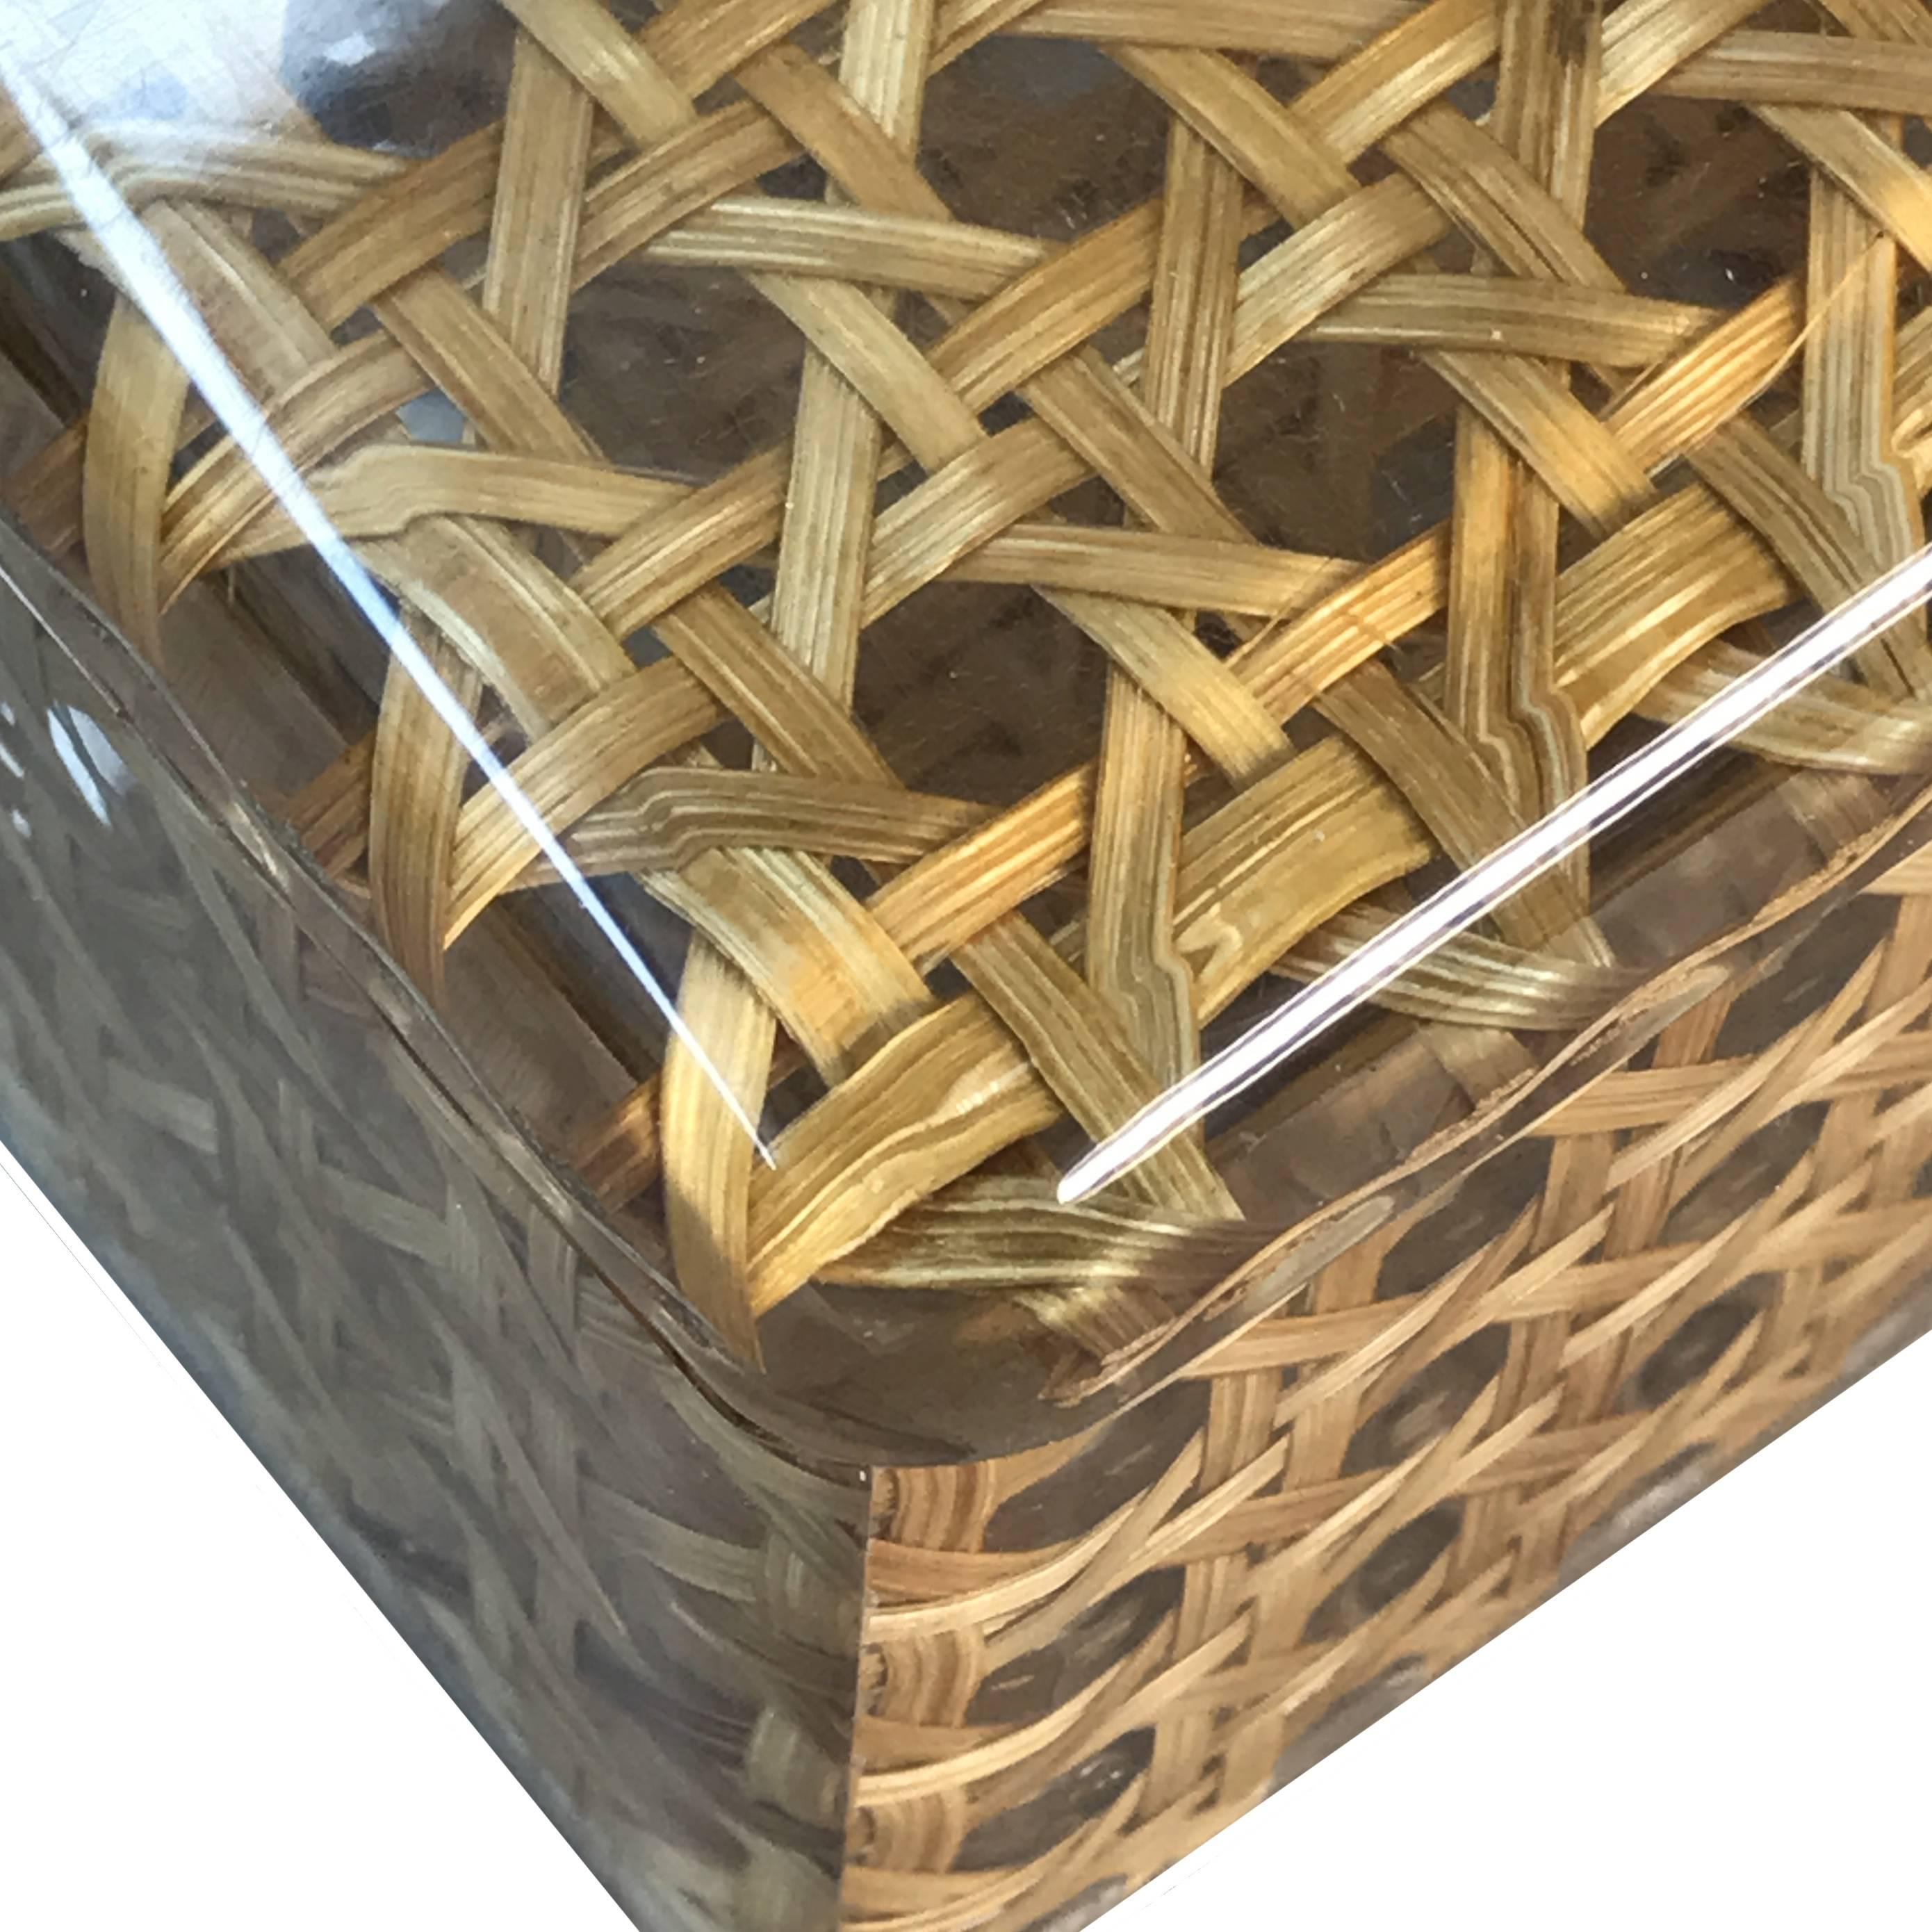 Late 20th Century Midcentury Lucite and Vienna Straw Wicker Italian Box 1970s Christian Dior Style